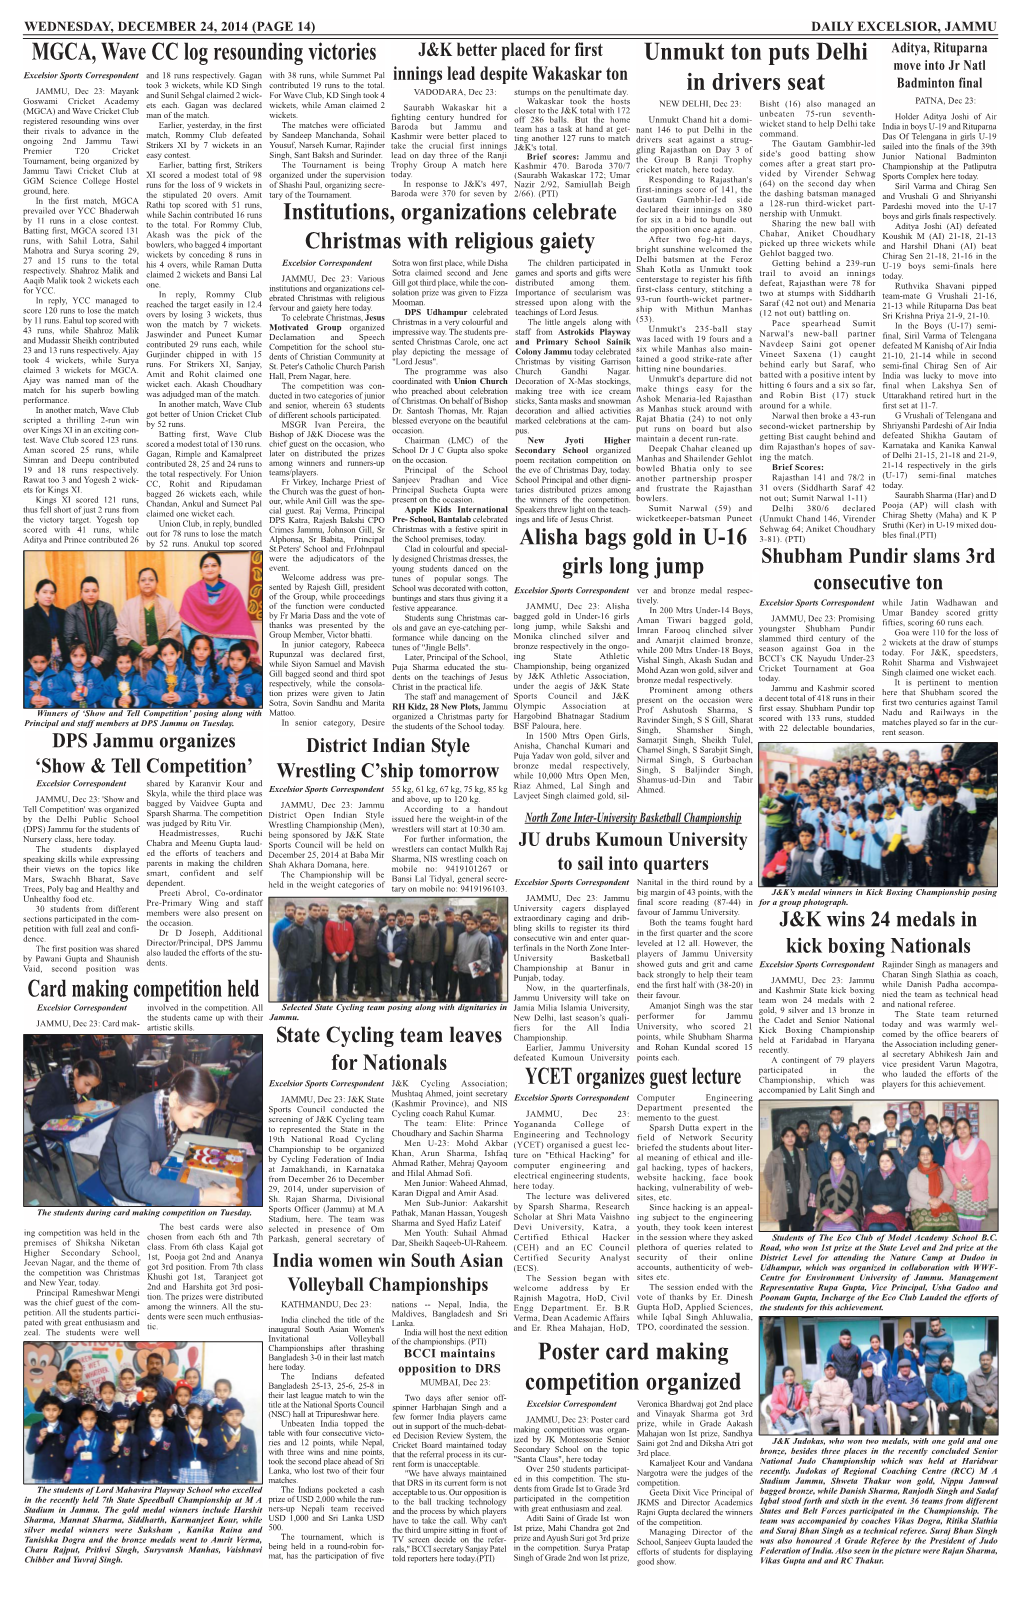 Page14 (Sports).Qxd (Page 1)